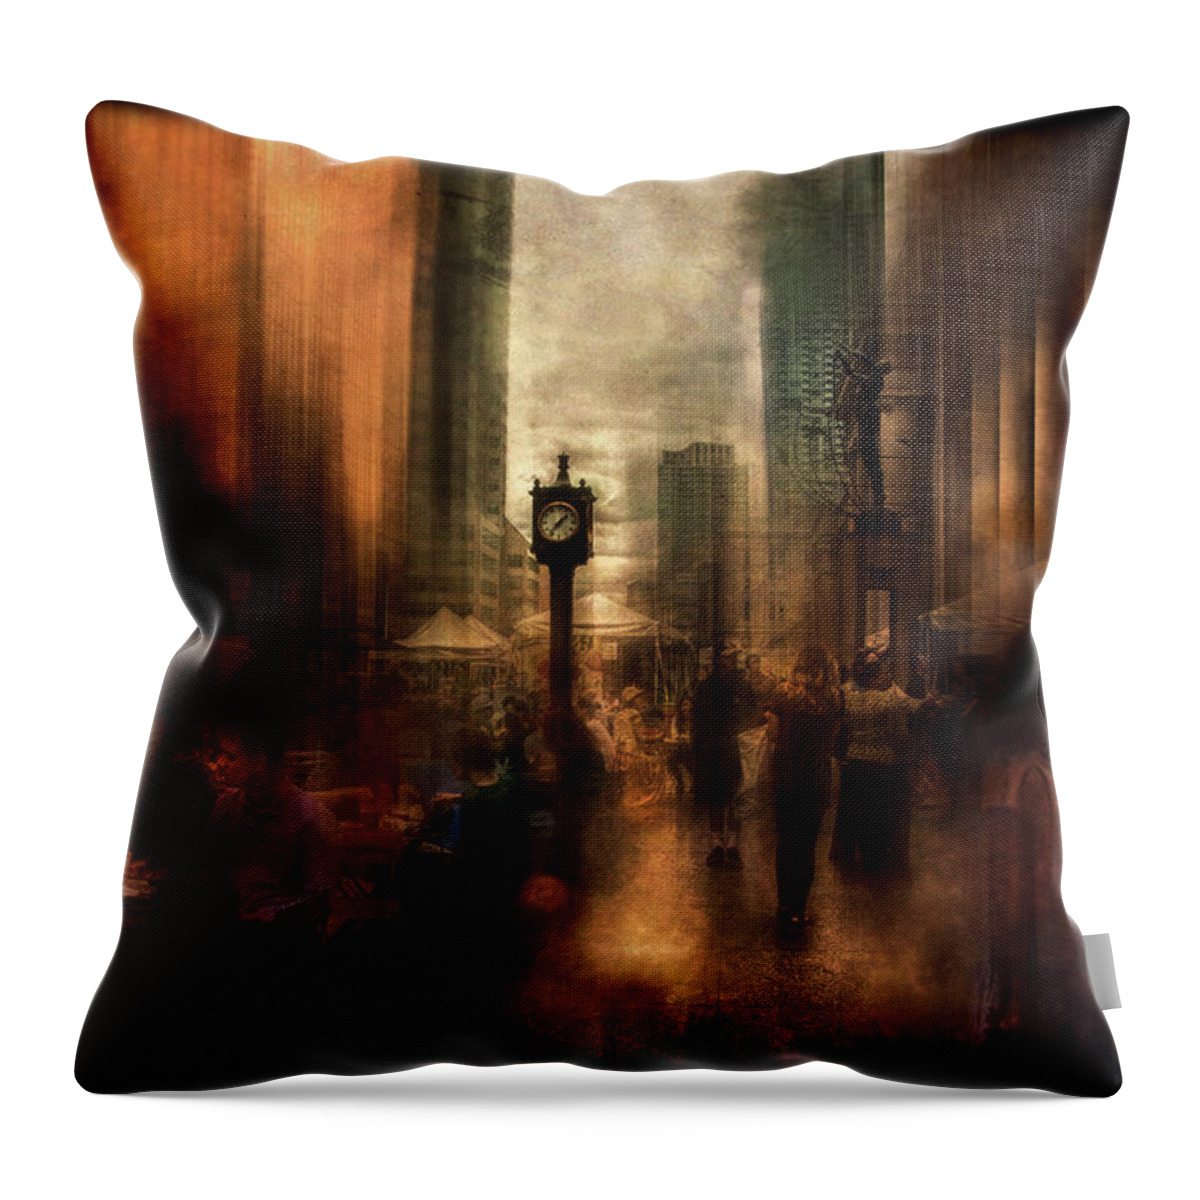  Throw Pillow featuring the photograph Toronto by Cybele Moon